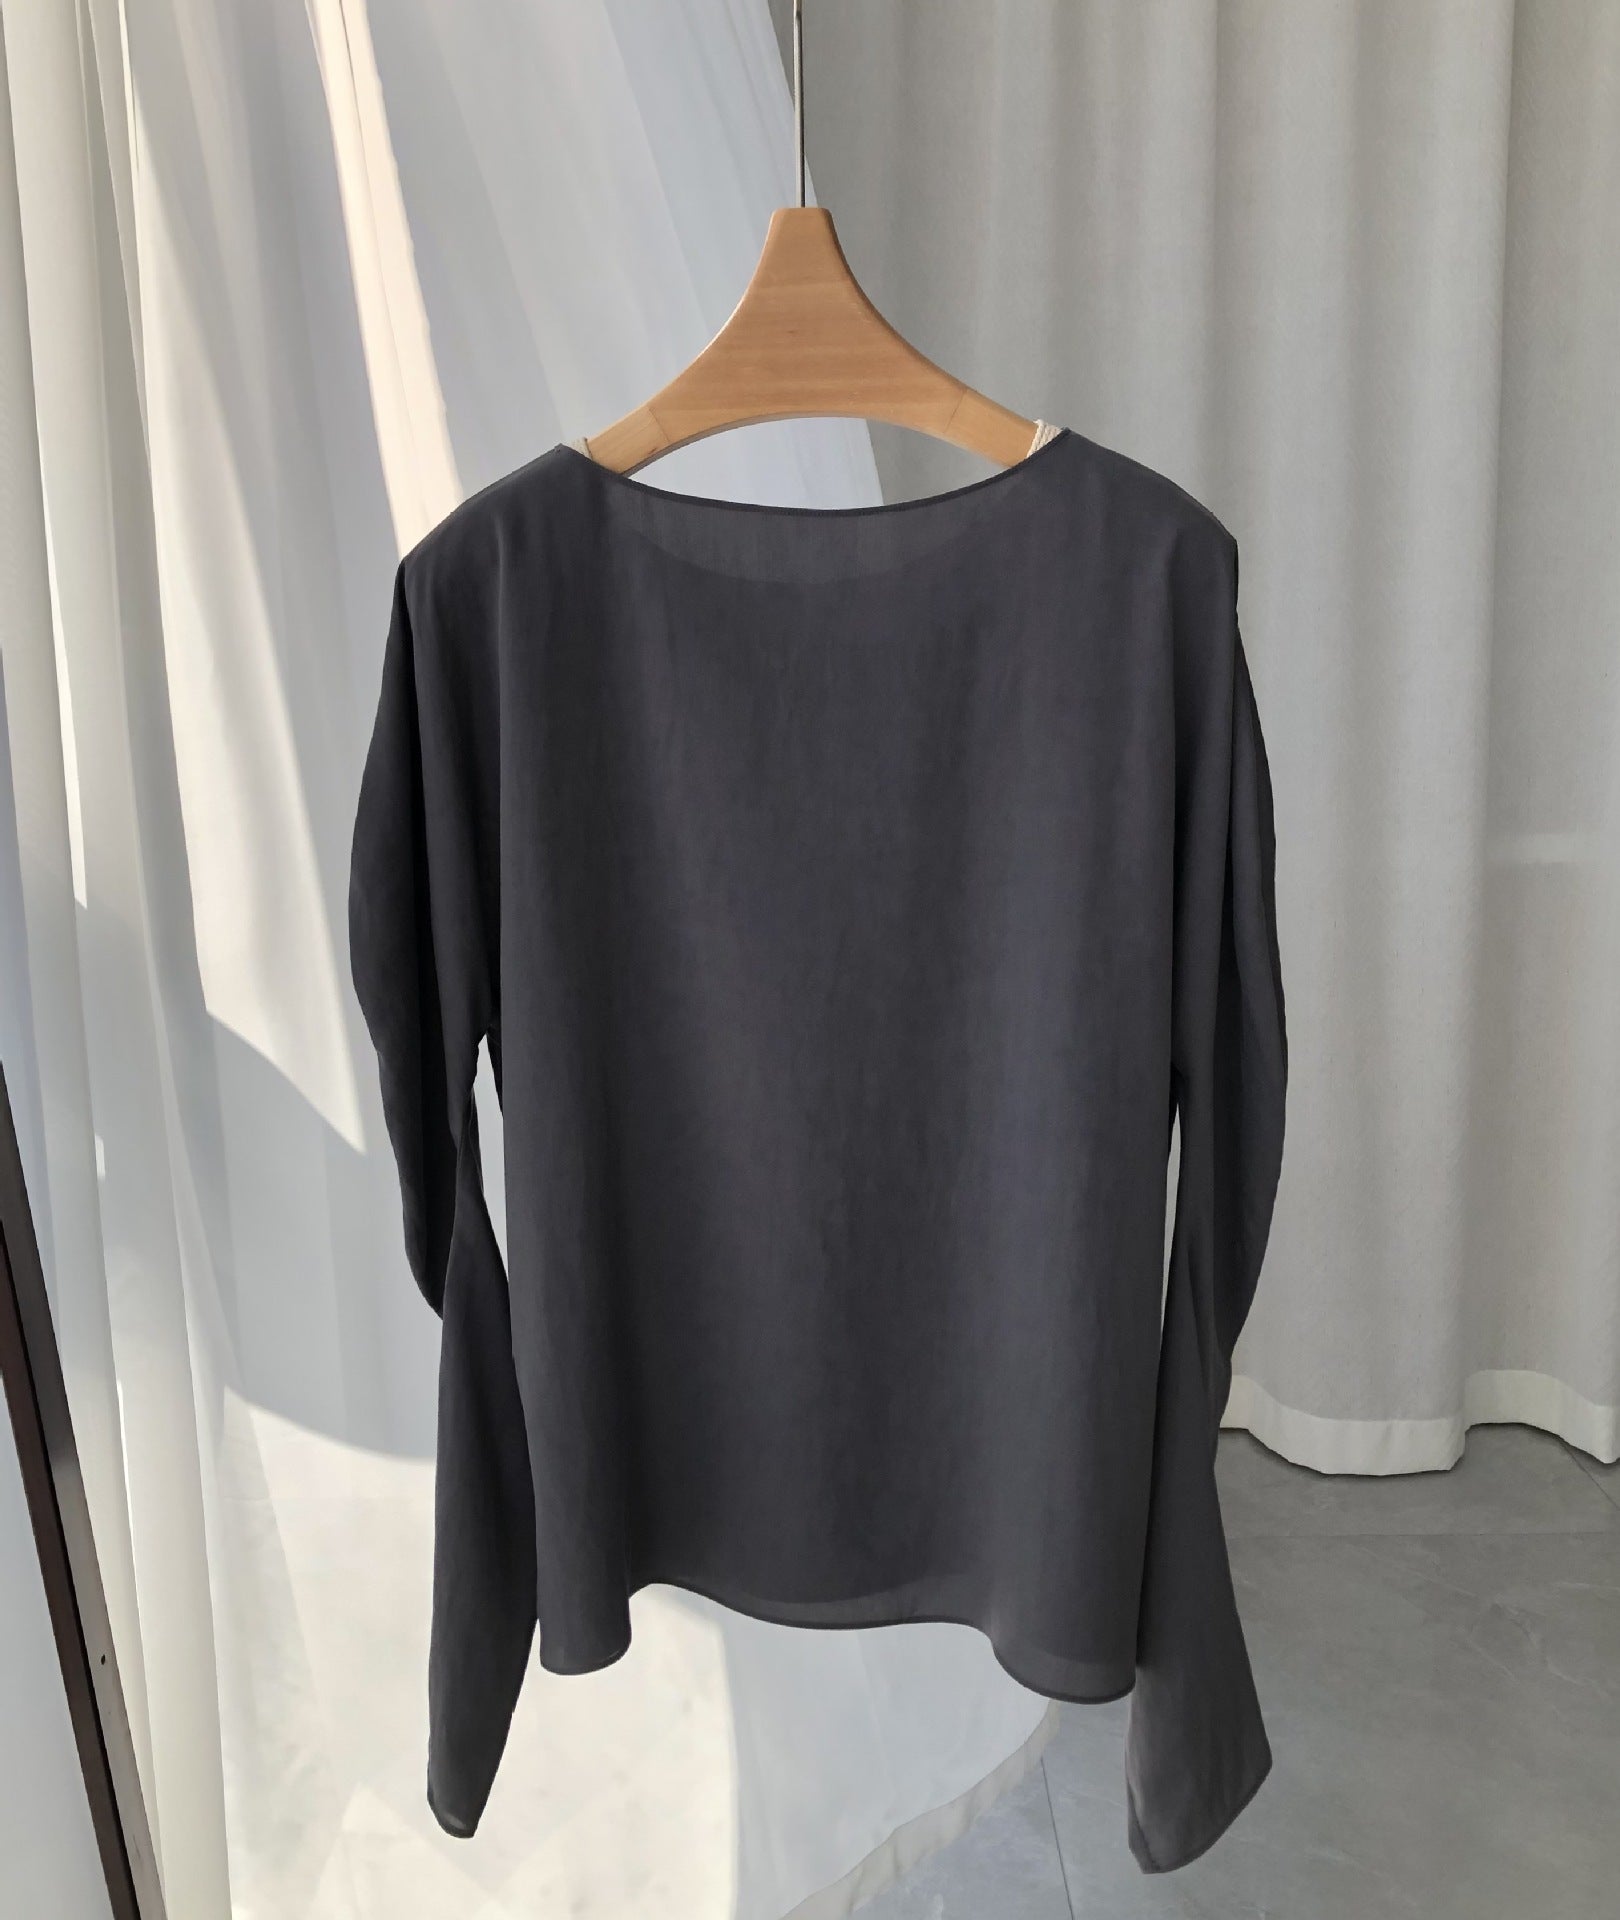 Silk Spinning Boat Neck Top Shirt with High Collar and Cold Gray Personality Sleeves